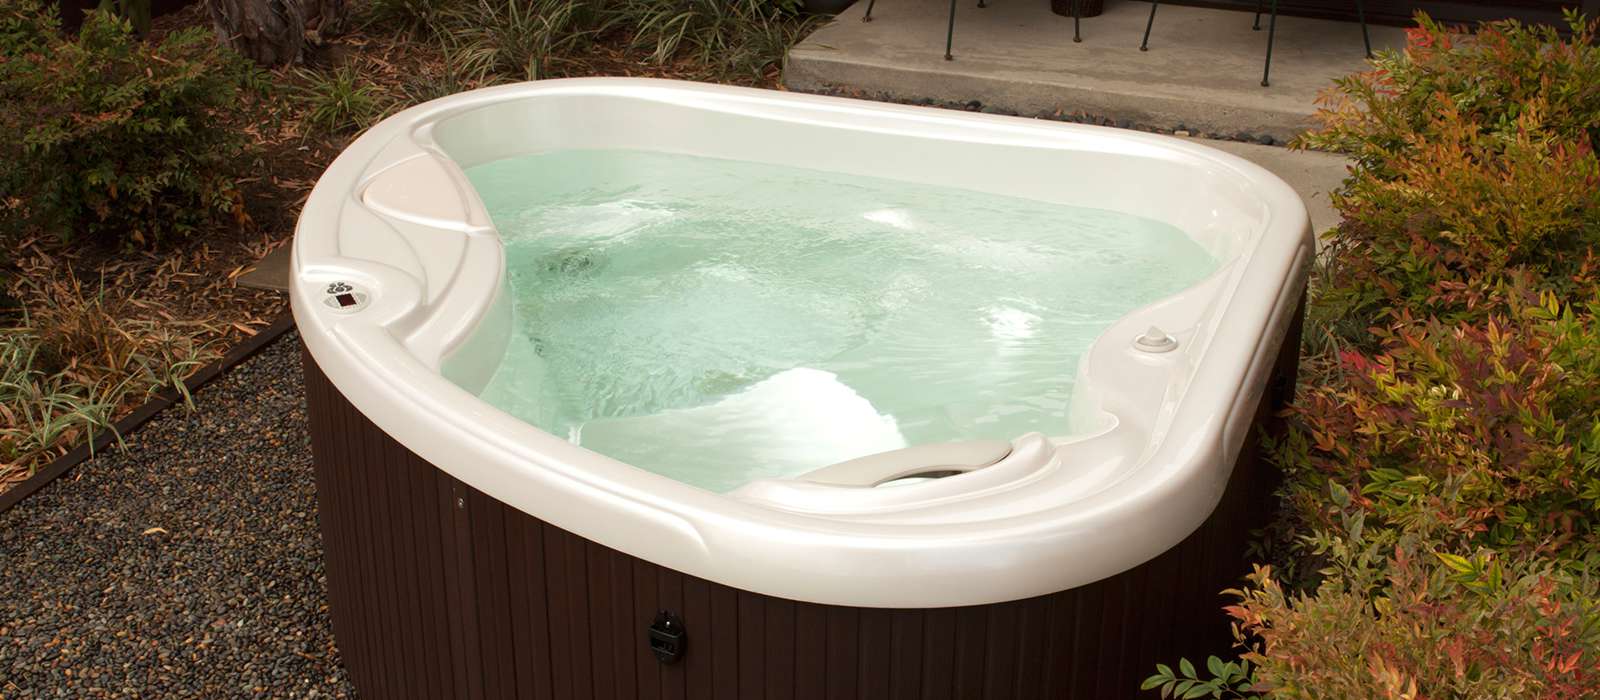 Caring for the TX hot tub is easy with the optional EverFresh® water care system. EverFresh continuously cleans the hot tub with innovative ozone technology. 